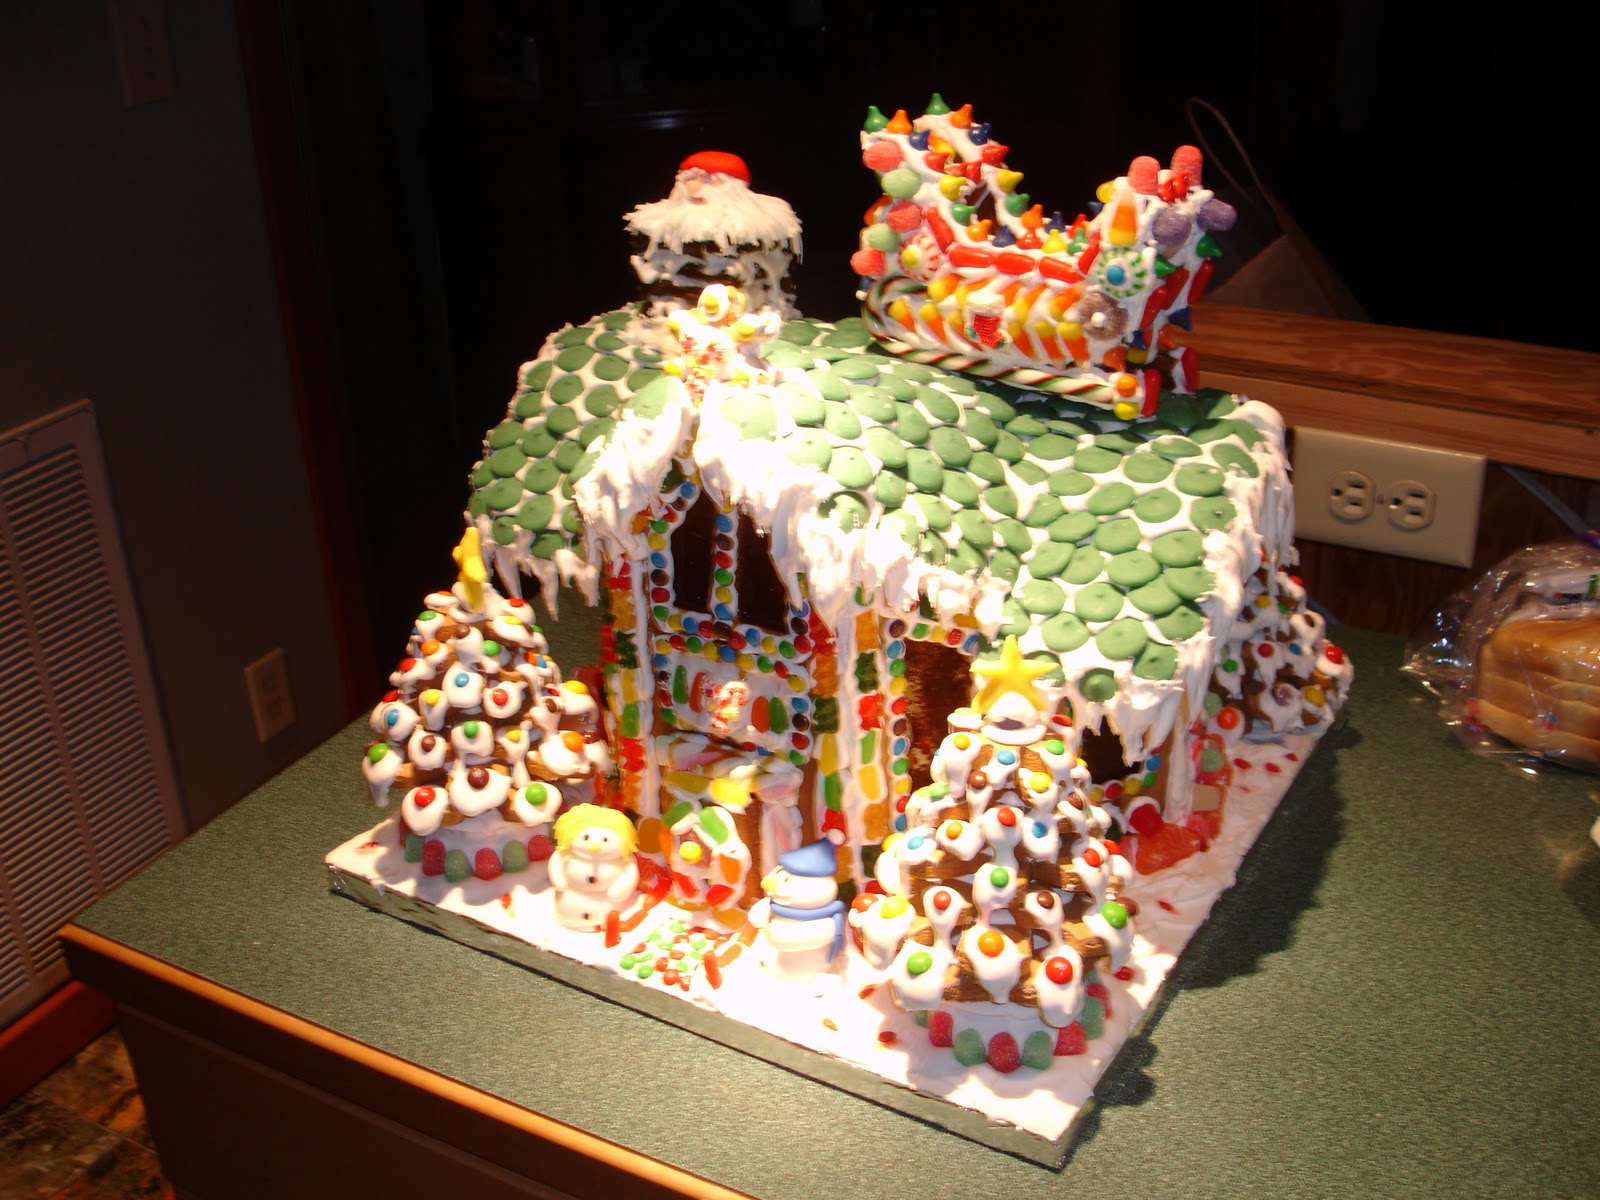 Nobody's Home: 9100 Gingerbread House1600 x 1200